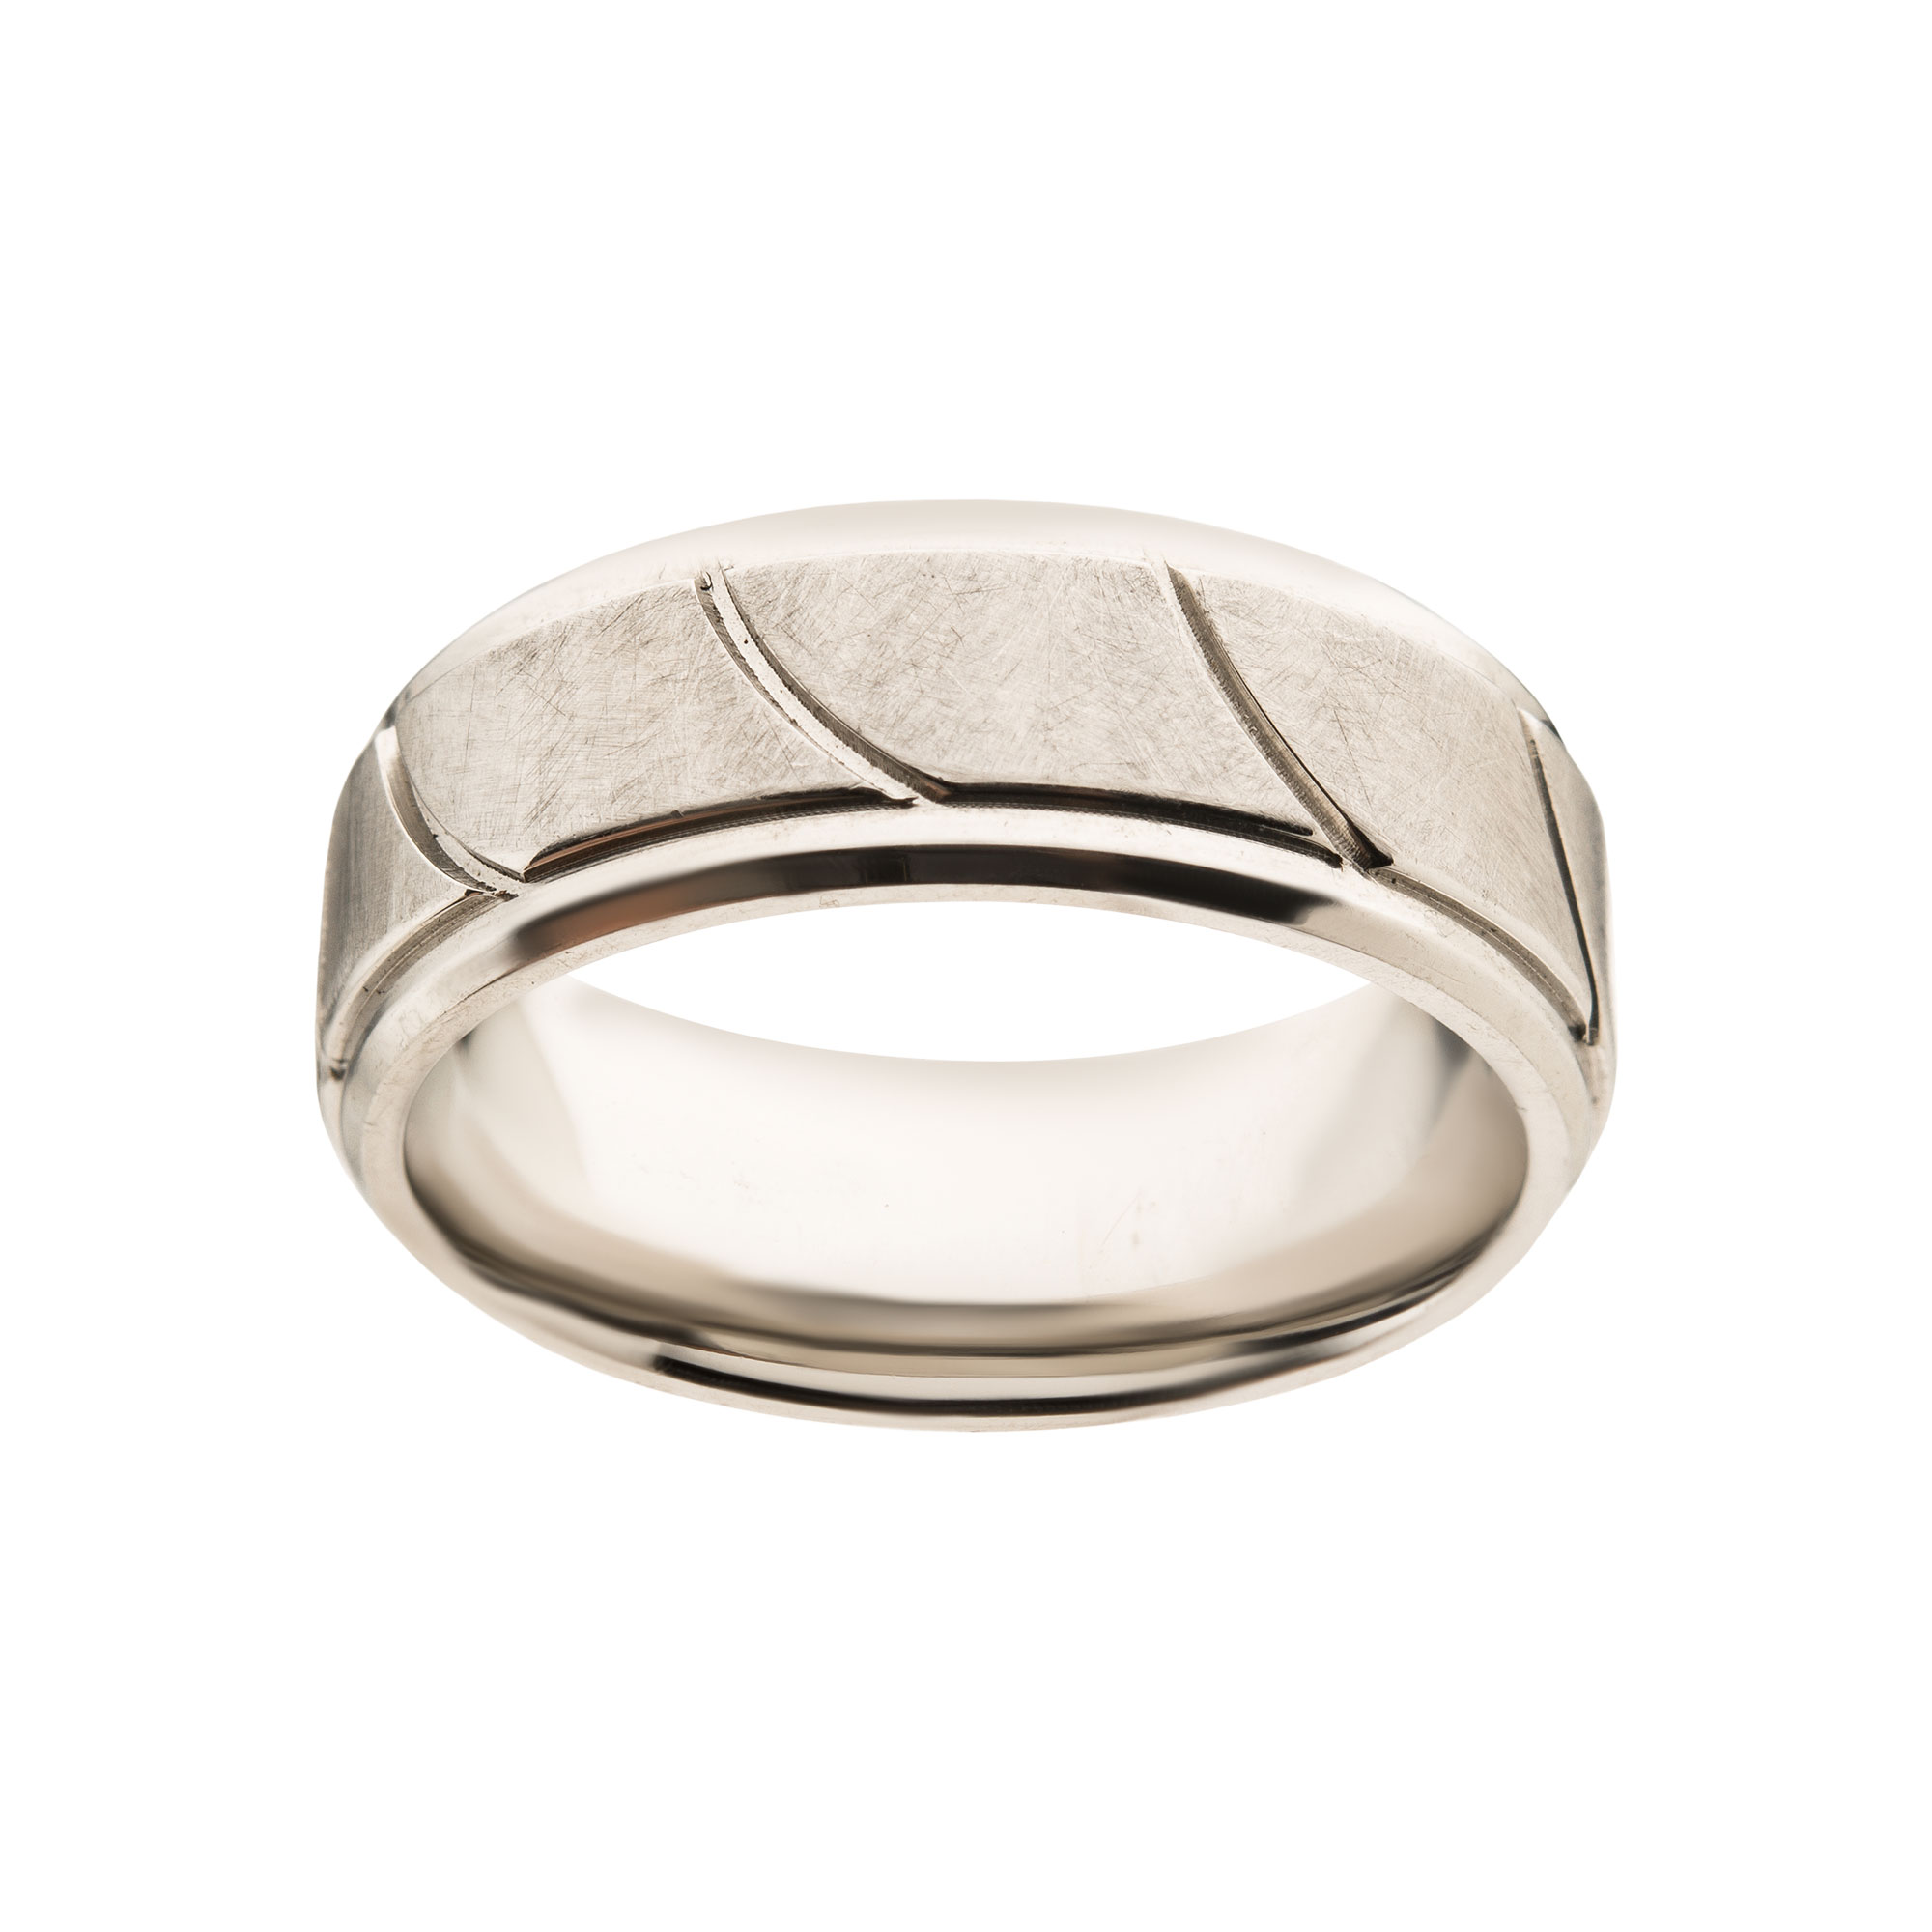 Steel Brushed with Grooves Beveled Ring Image 2 Enchanted Jewelry Plainfield, CT